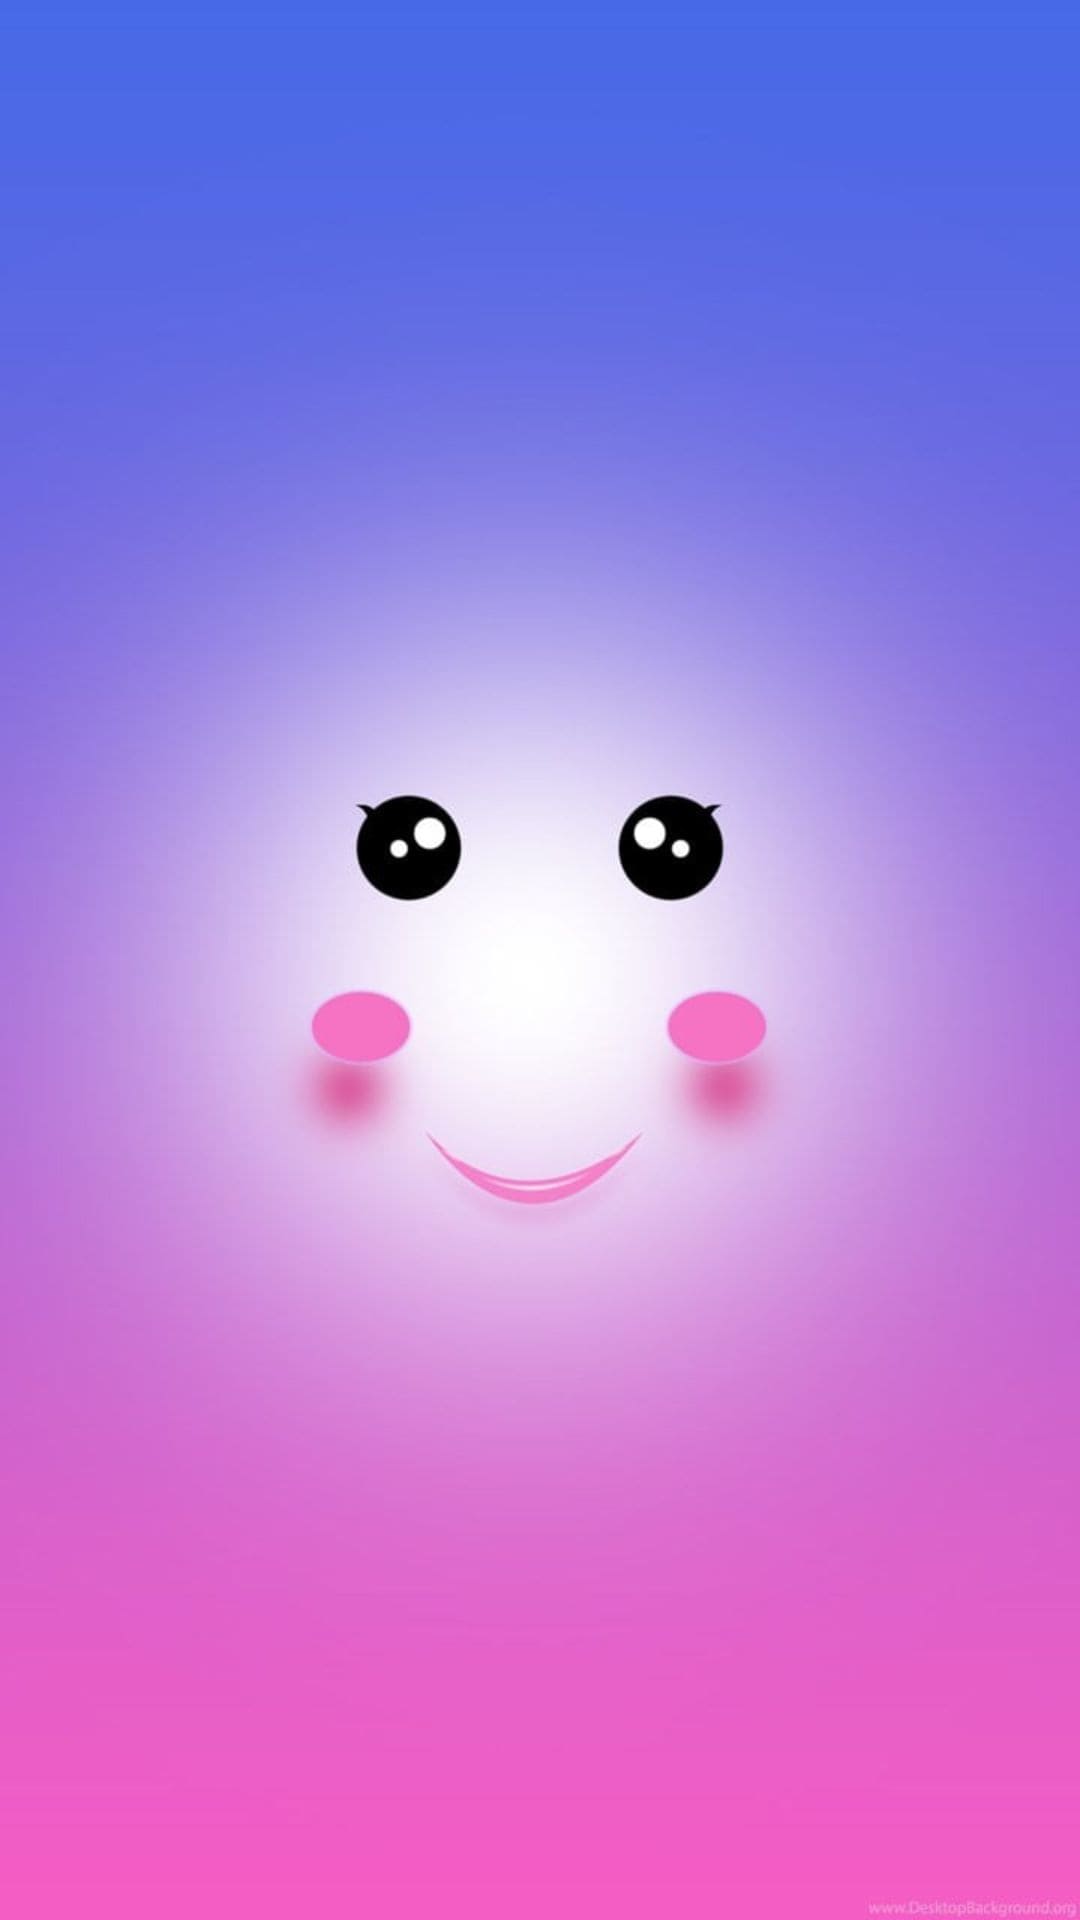 Smiley Face Wallpapers  Top 16 Best Smiley Face Wallpapers  HQ 